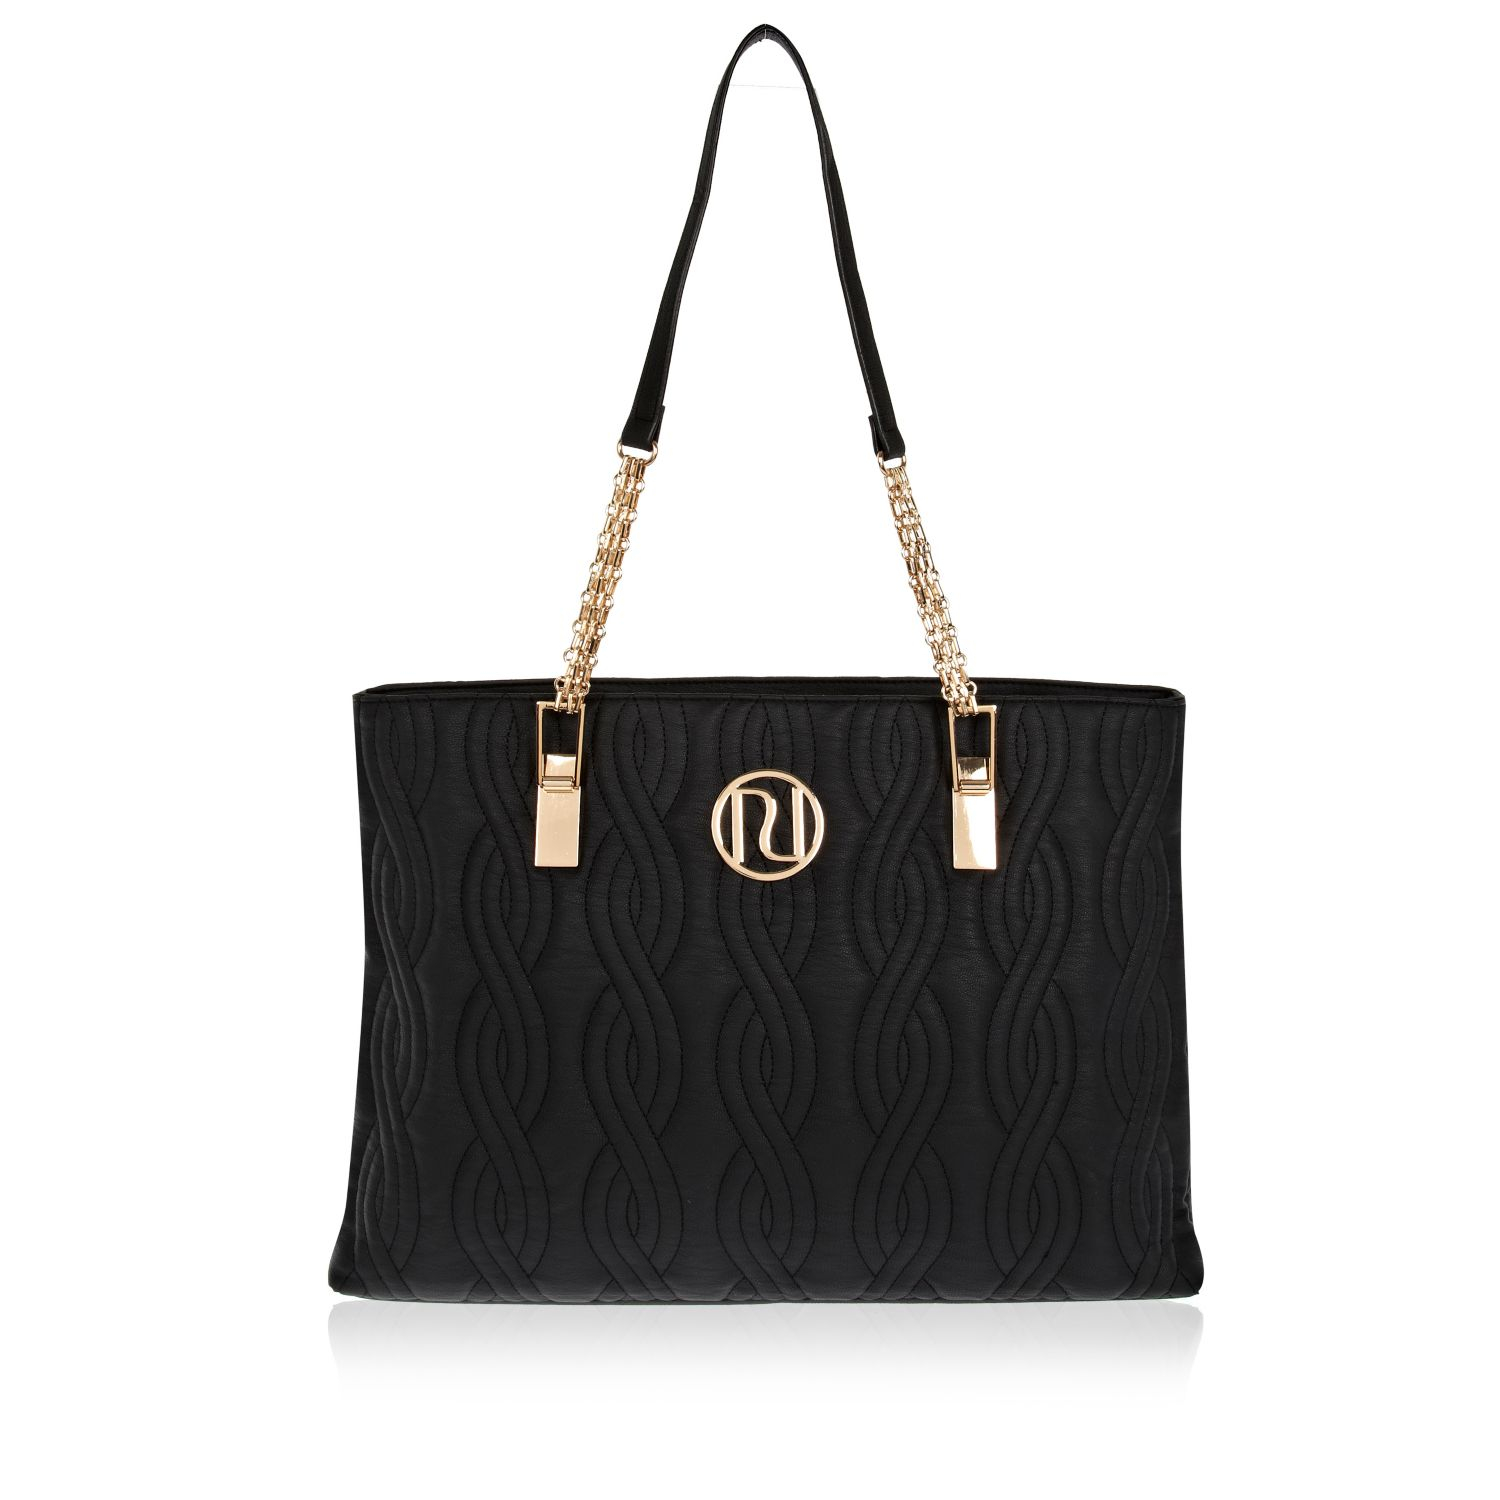 River Island Black Quilted Chain Strap Tote Bag in Black | Lyst